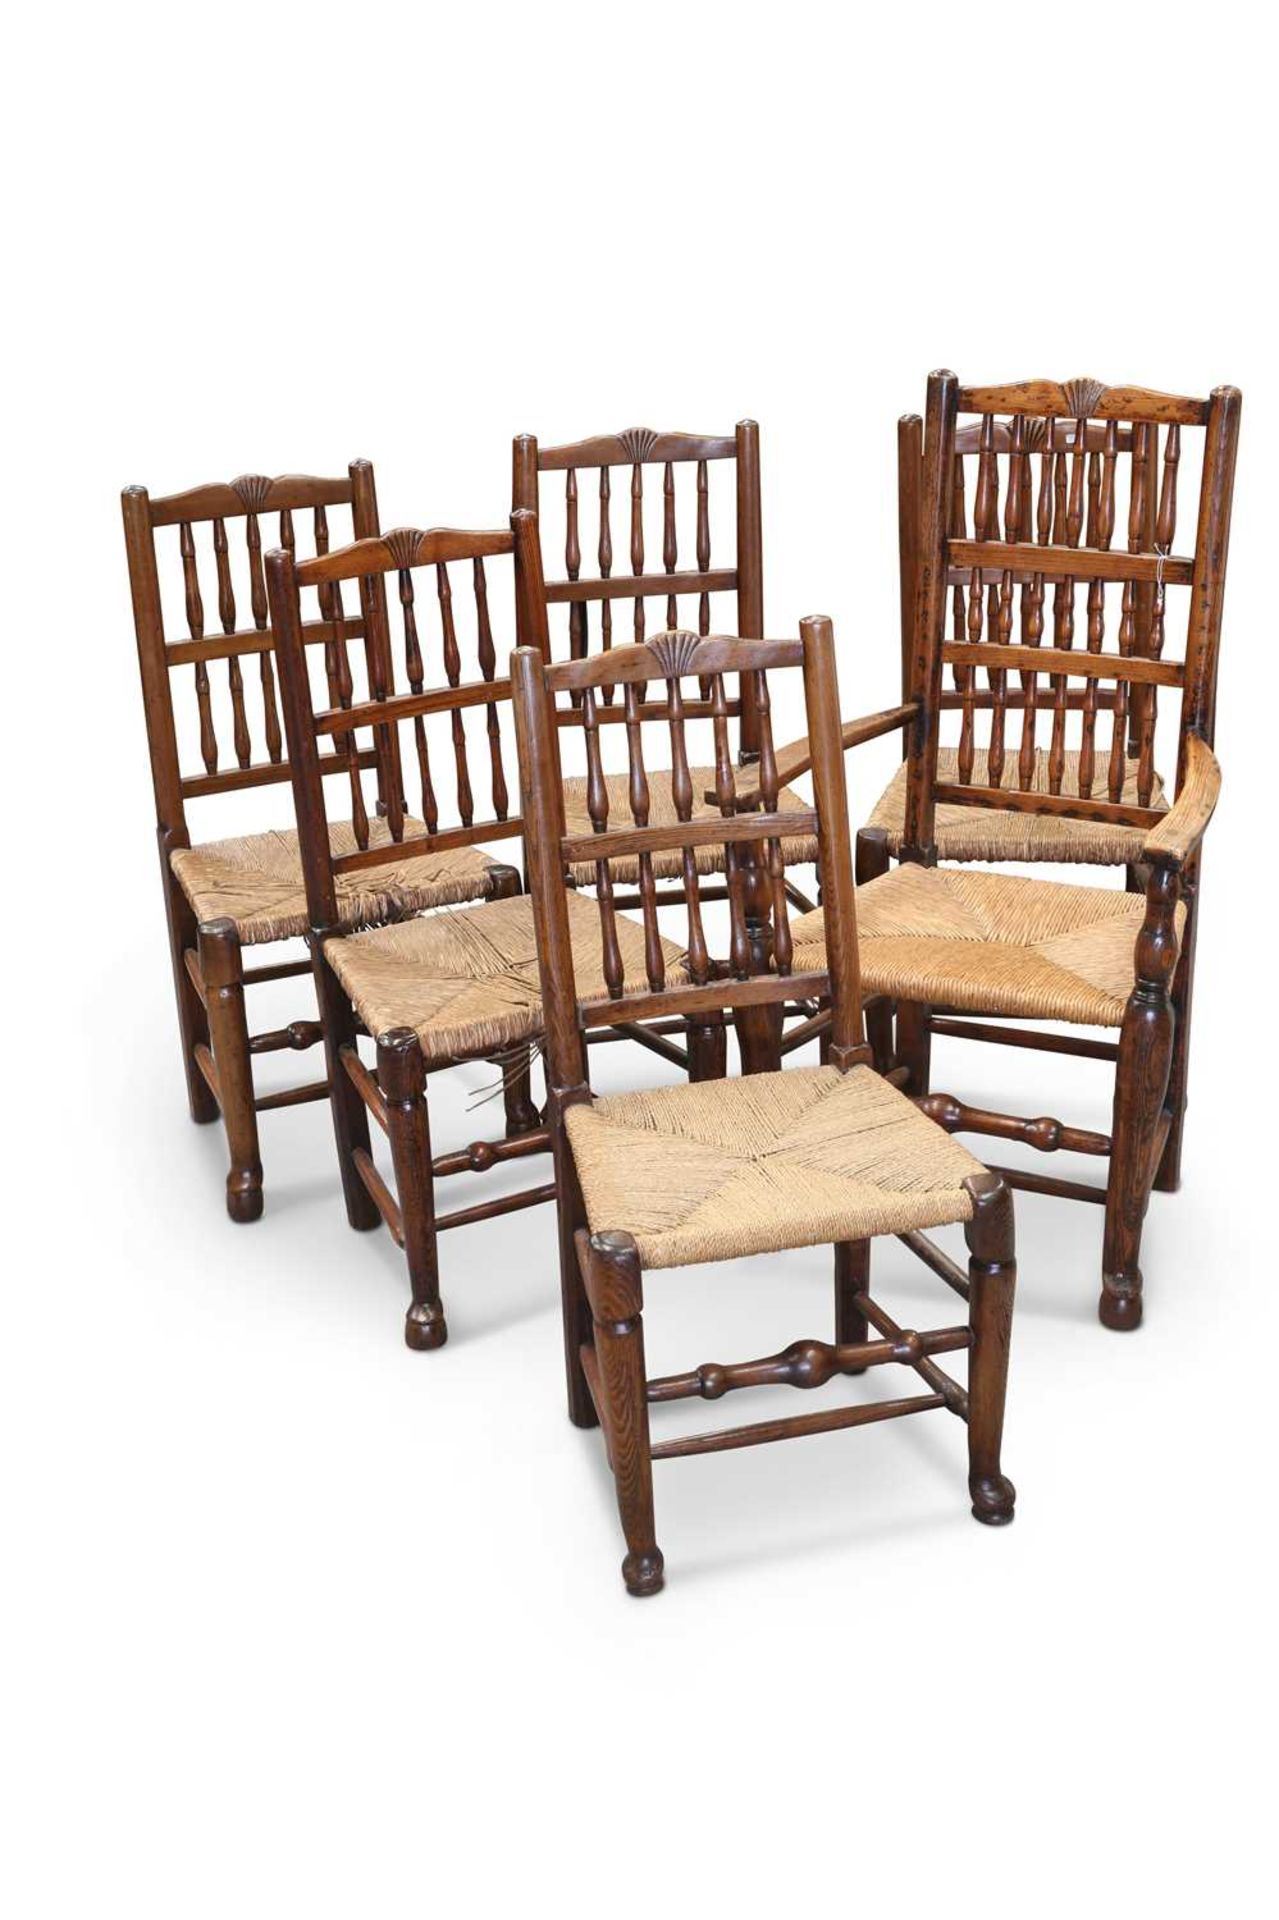 A SET OF SIX EARLY 19TH CENTURY OAK SPINDLE-BACK DINING CHAIRS, OF LANCASHIRE ORIGIN - Image 2 of 2